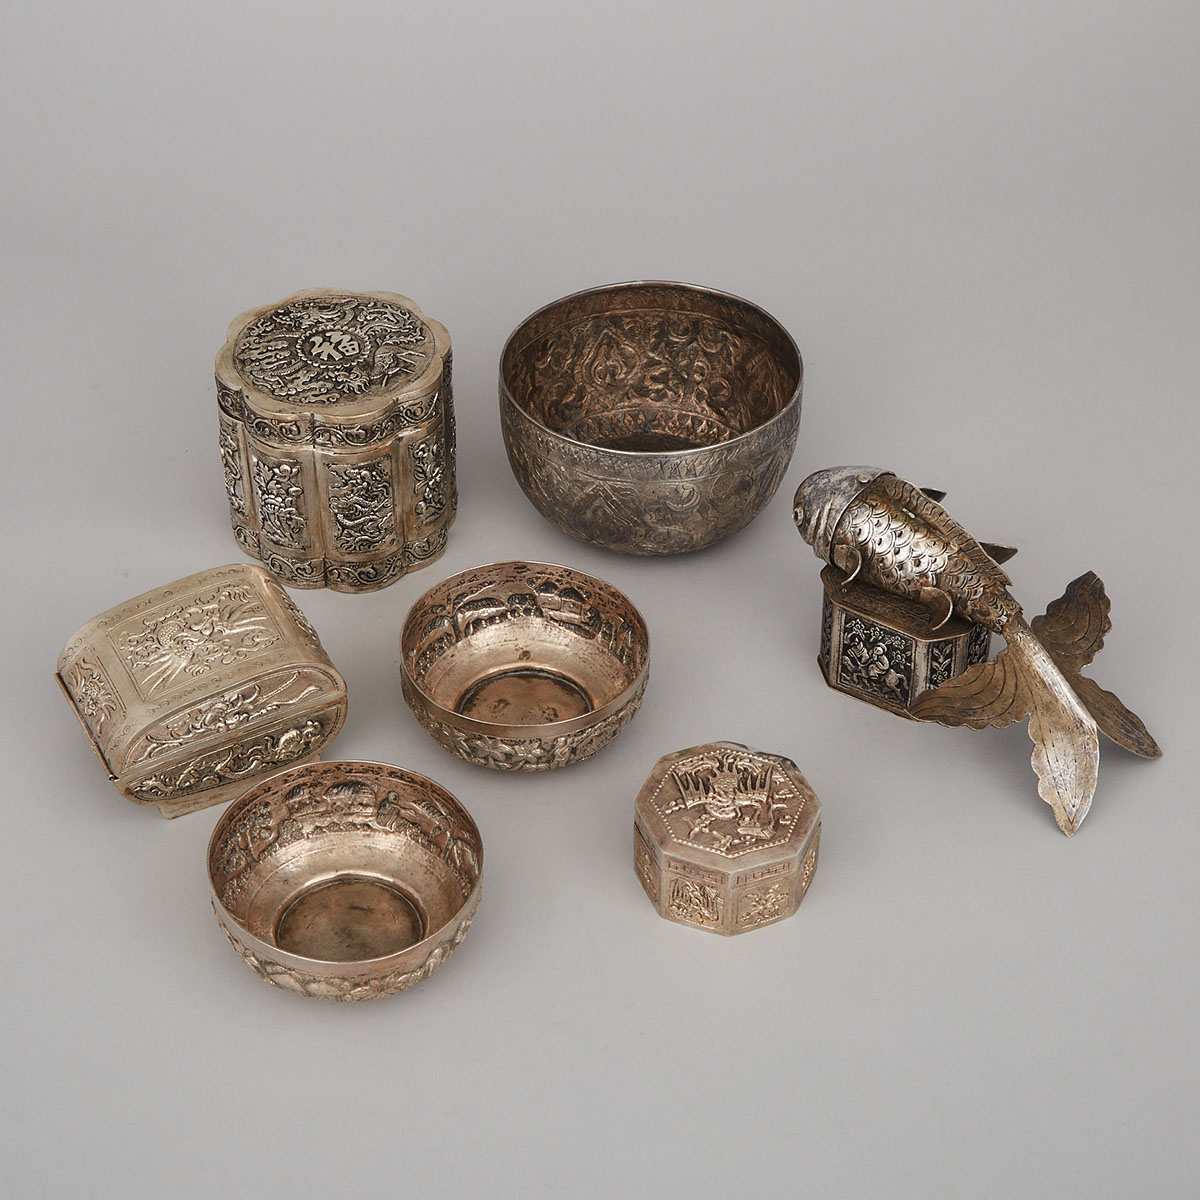 Four Eastern Silver Boxes and Three Bowls, late 19th/early 20th century